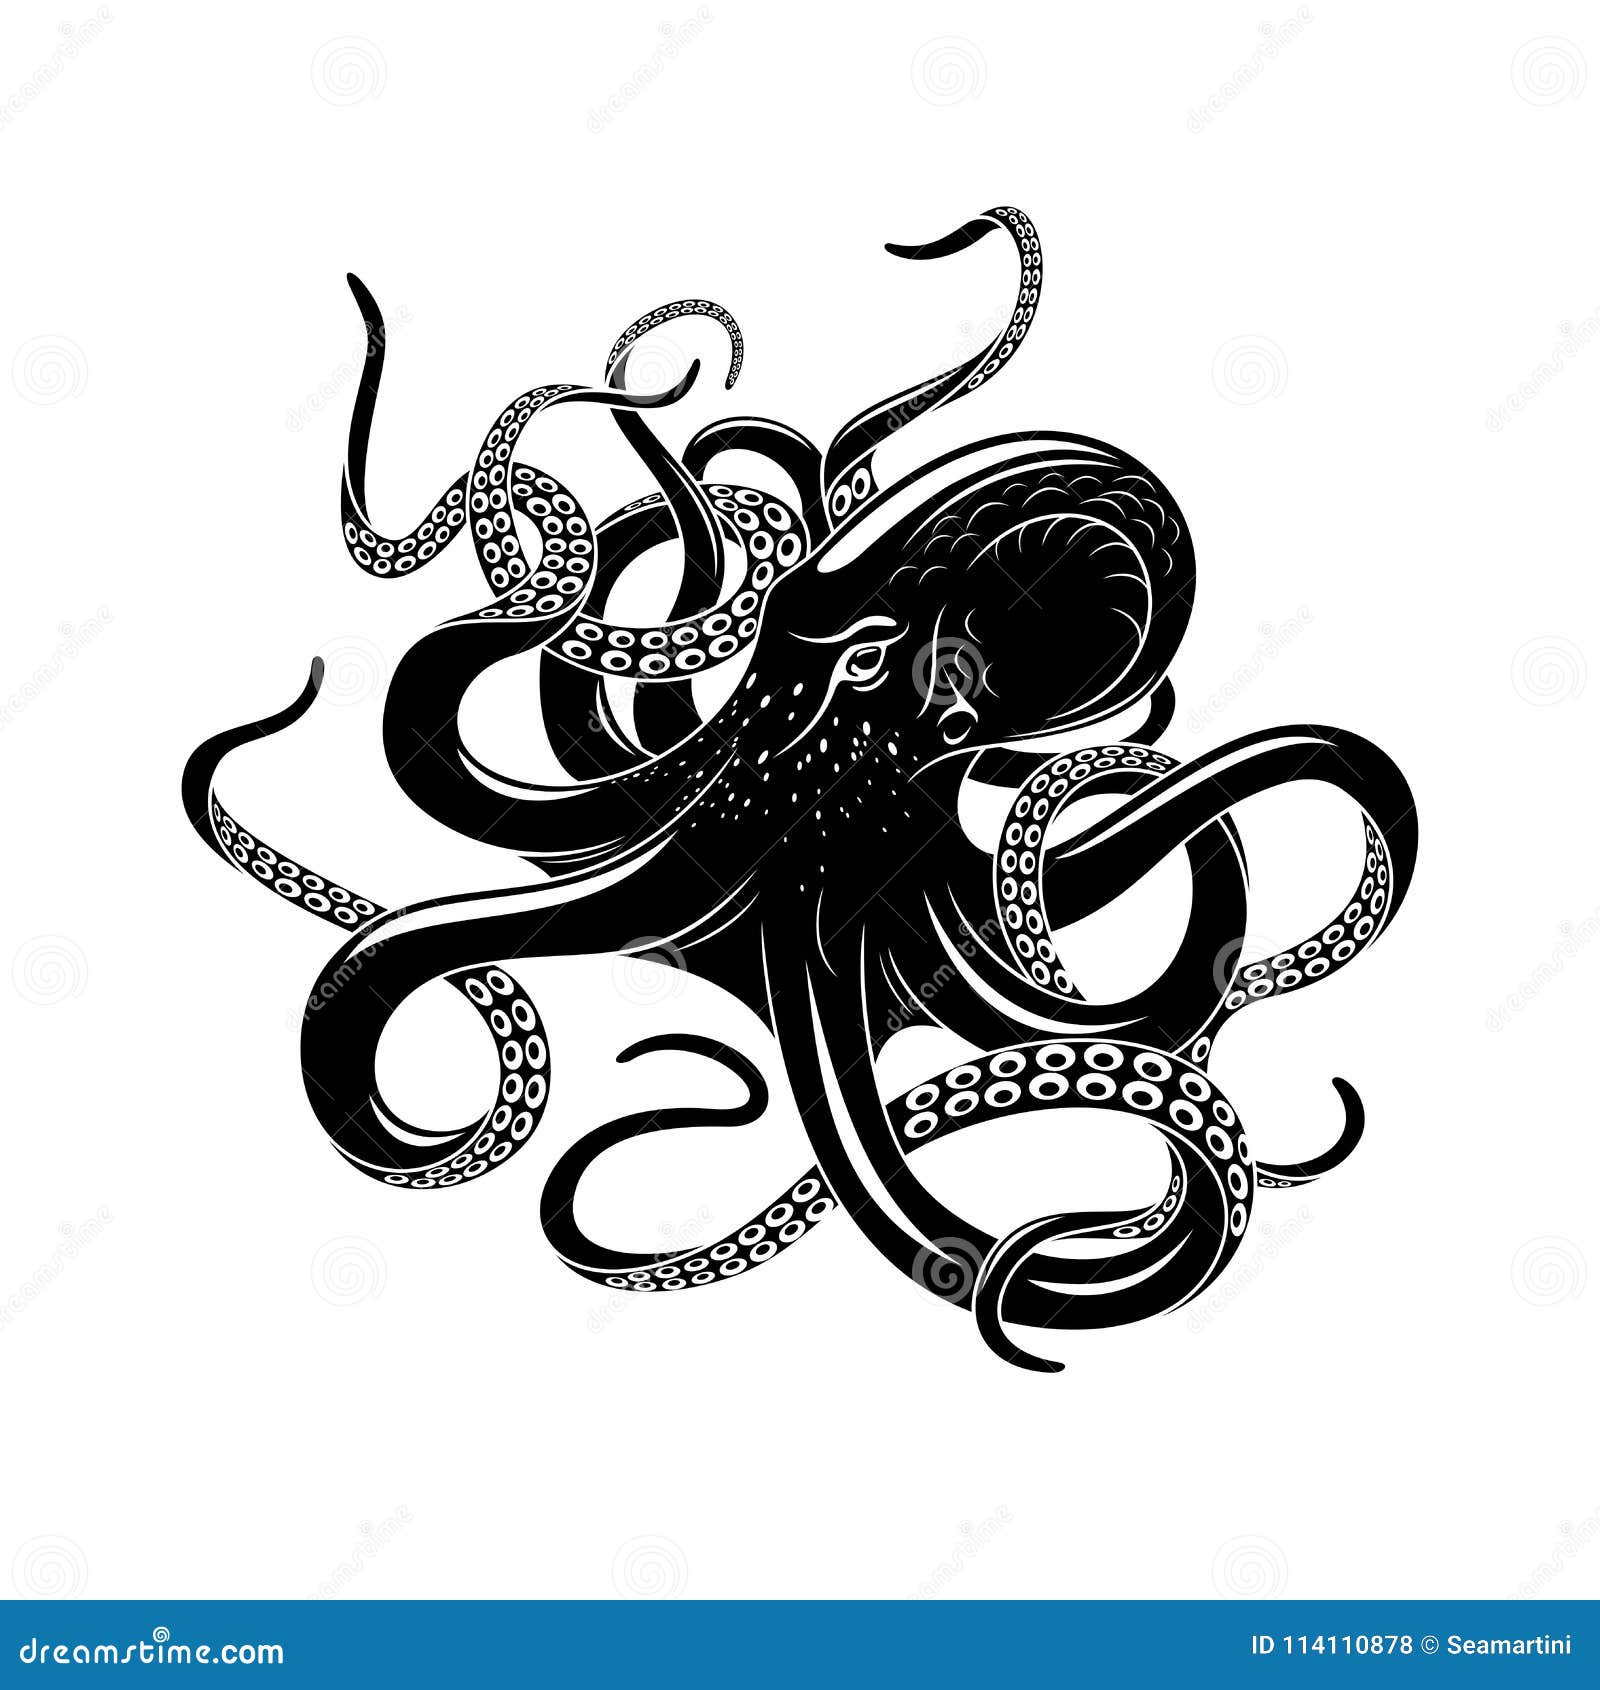 Octopus Tattoos Designs And Pictures  Tattoo Octopus Transparent PNG   754x1058  Free Download on NicePNG